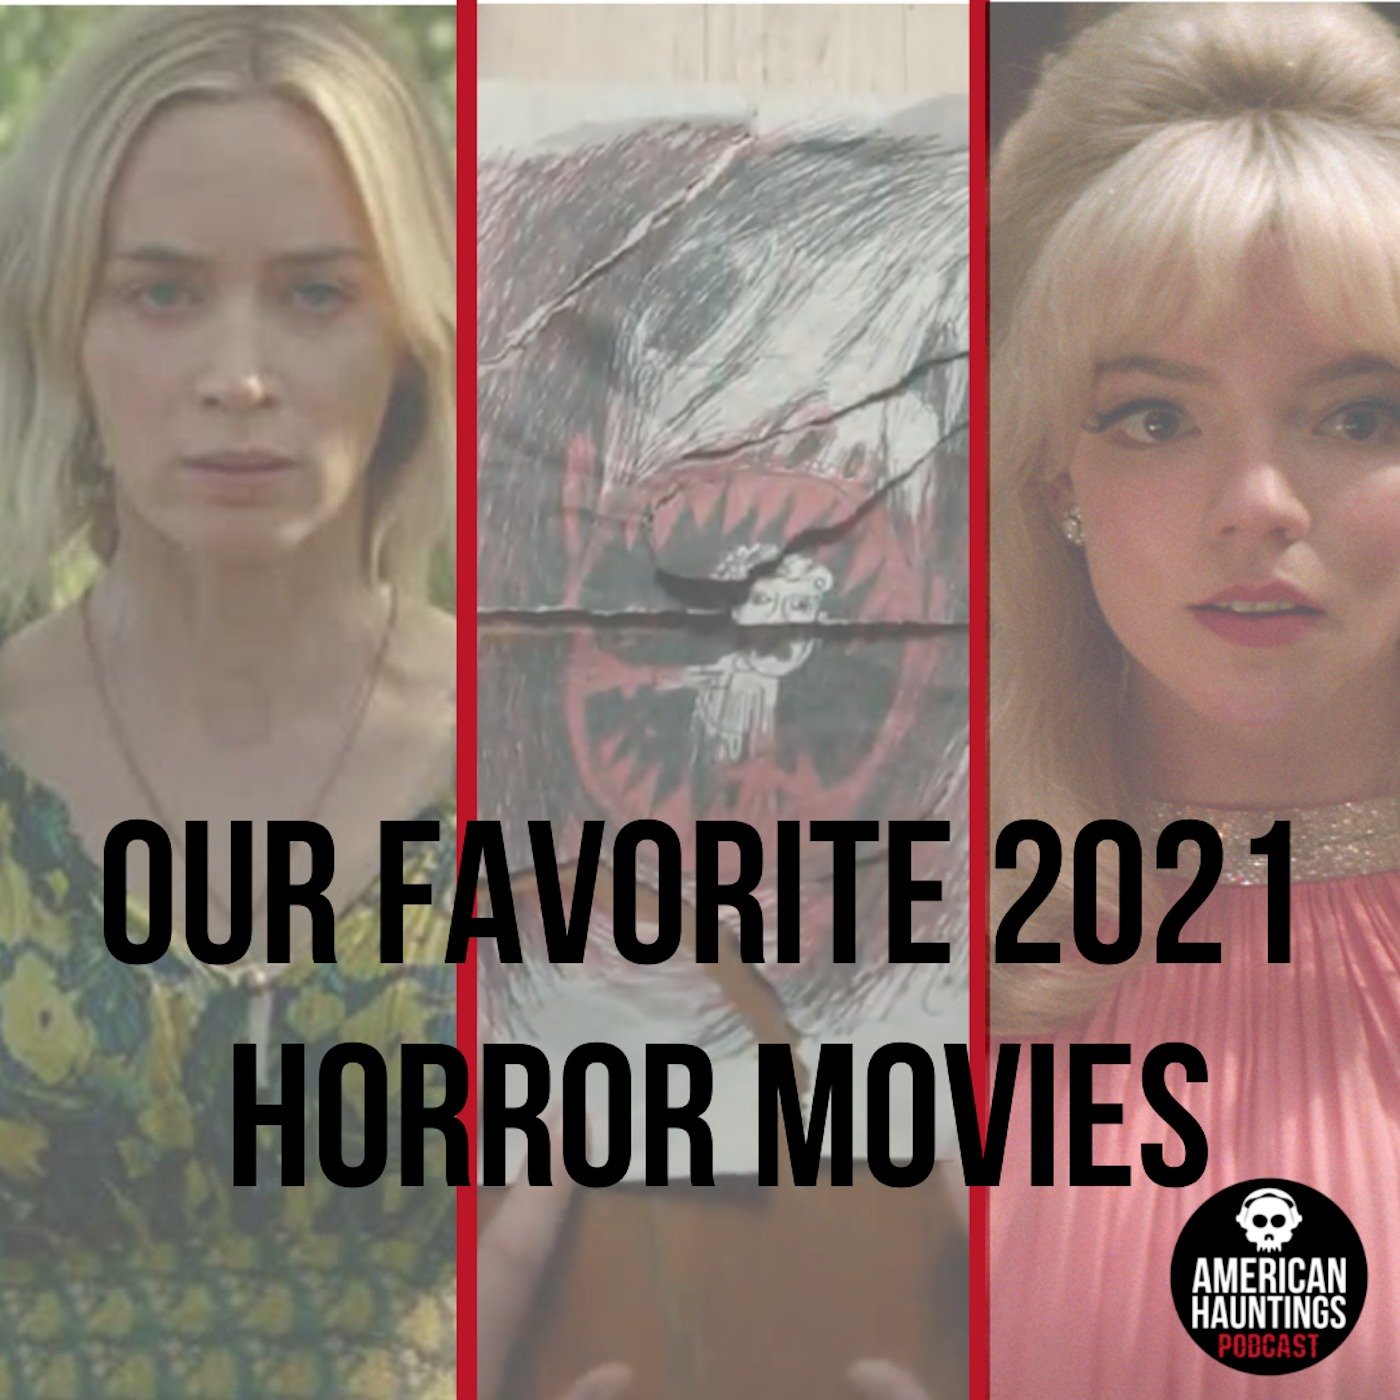 American Hauntings Podcast, Season 5, Our Favorite 2021 Horror Movies